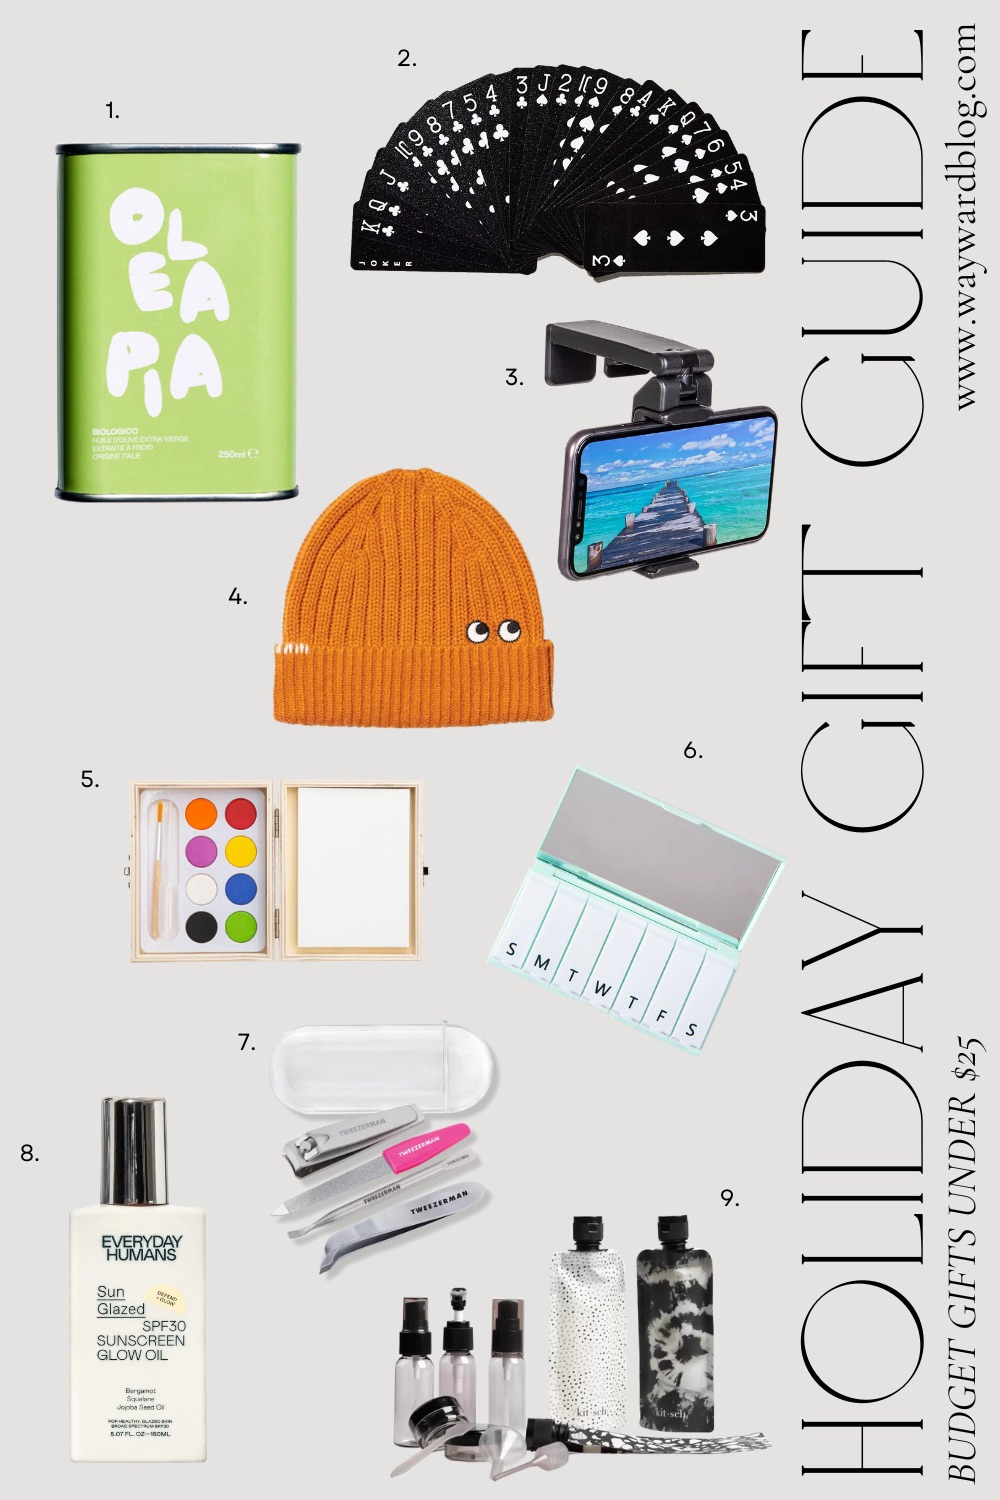 A collage of budget gifts under $25 with numbers that correspond to the links below